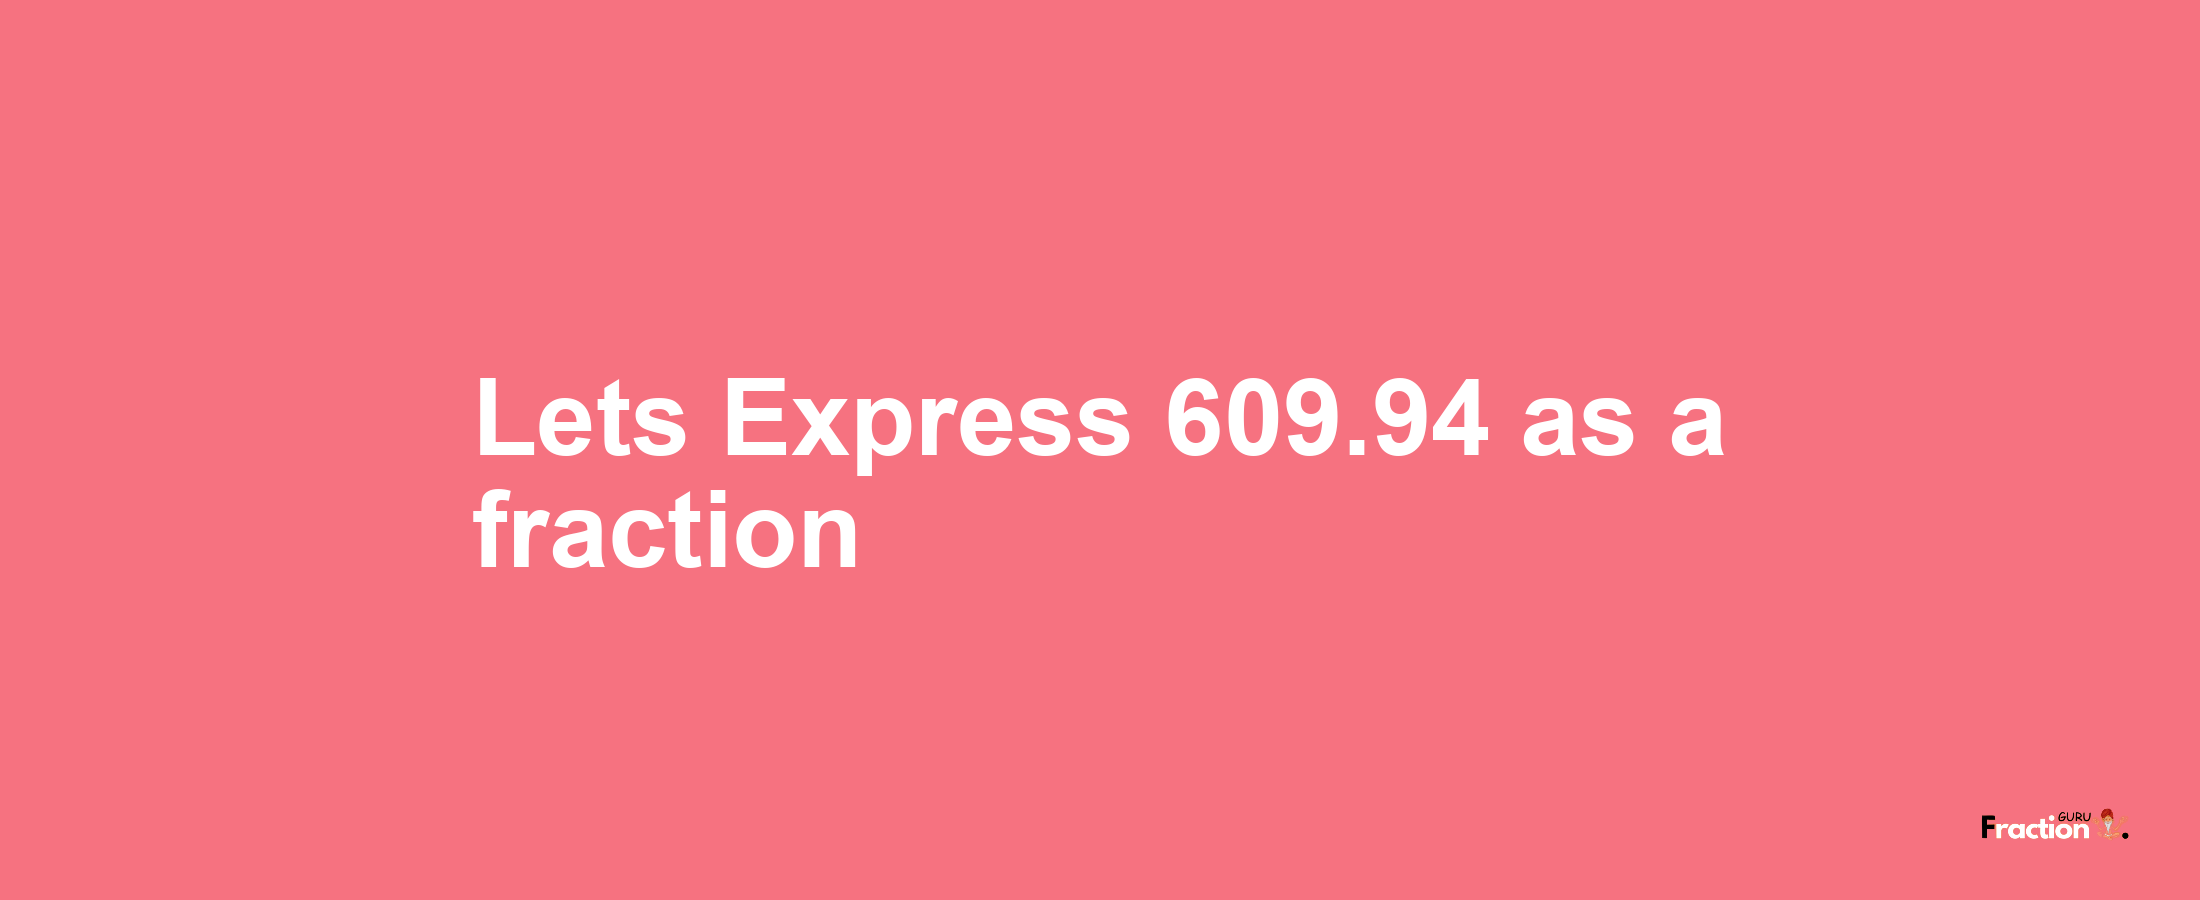 Lets Express 609.94 as afraction